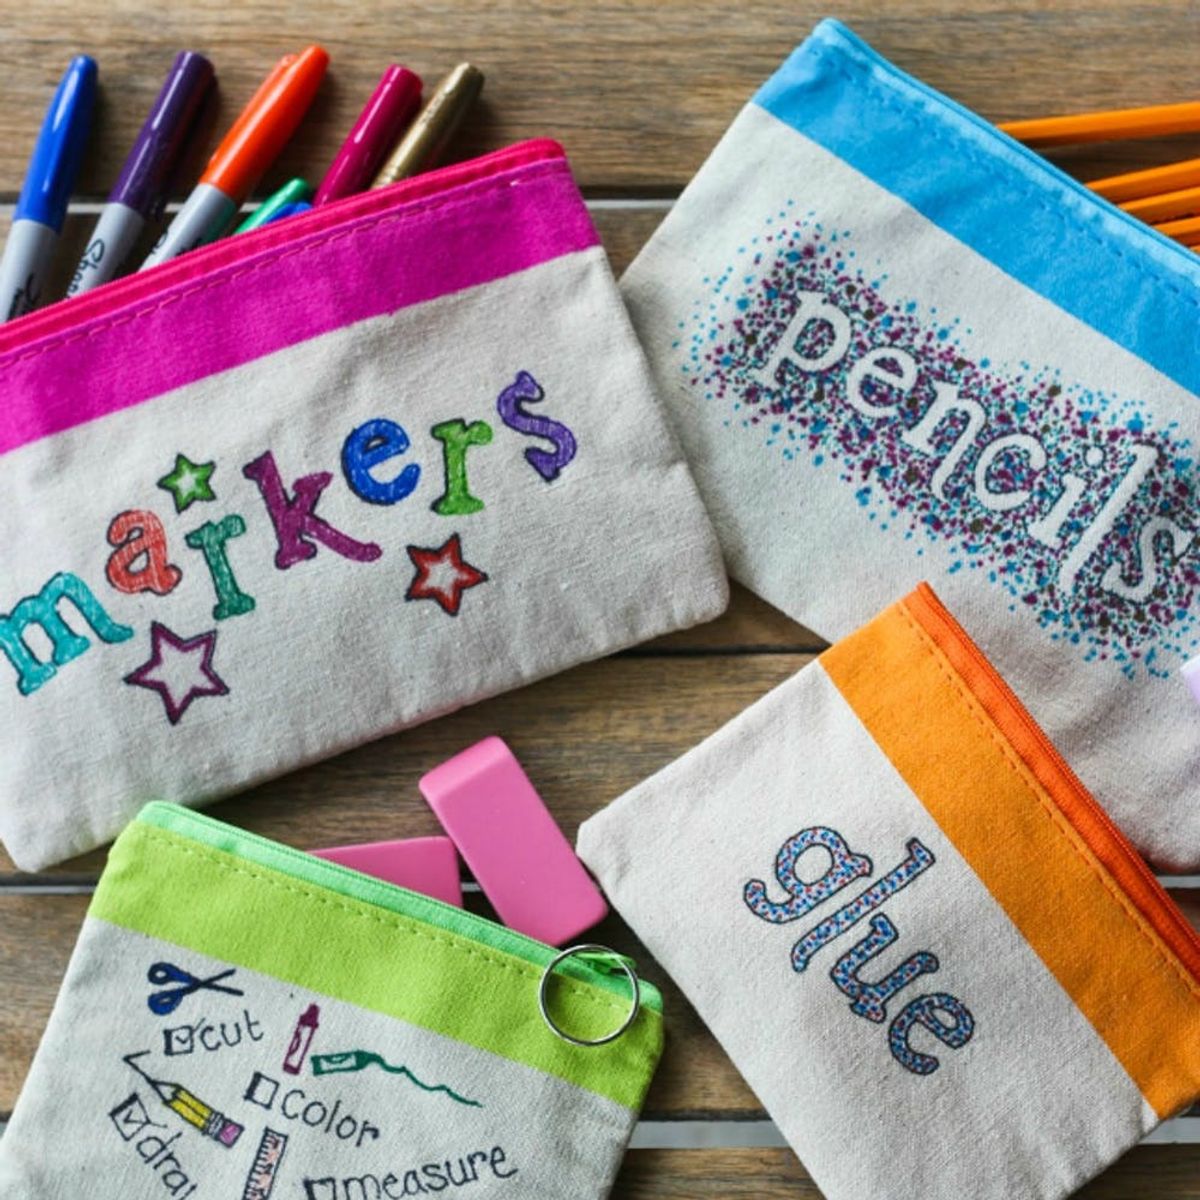 17 of the Most Pinned Back-to-School Supplies, According to Pinterest